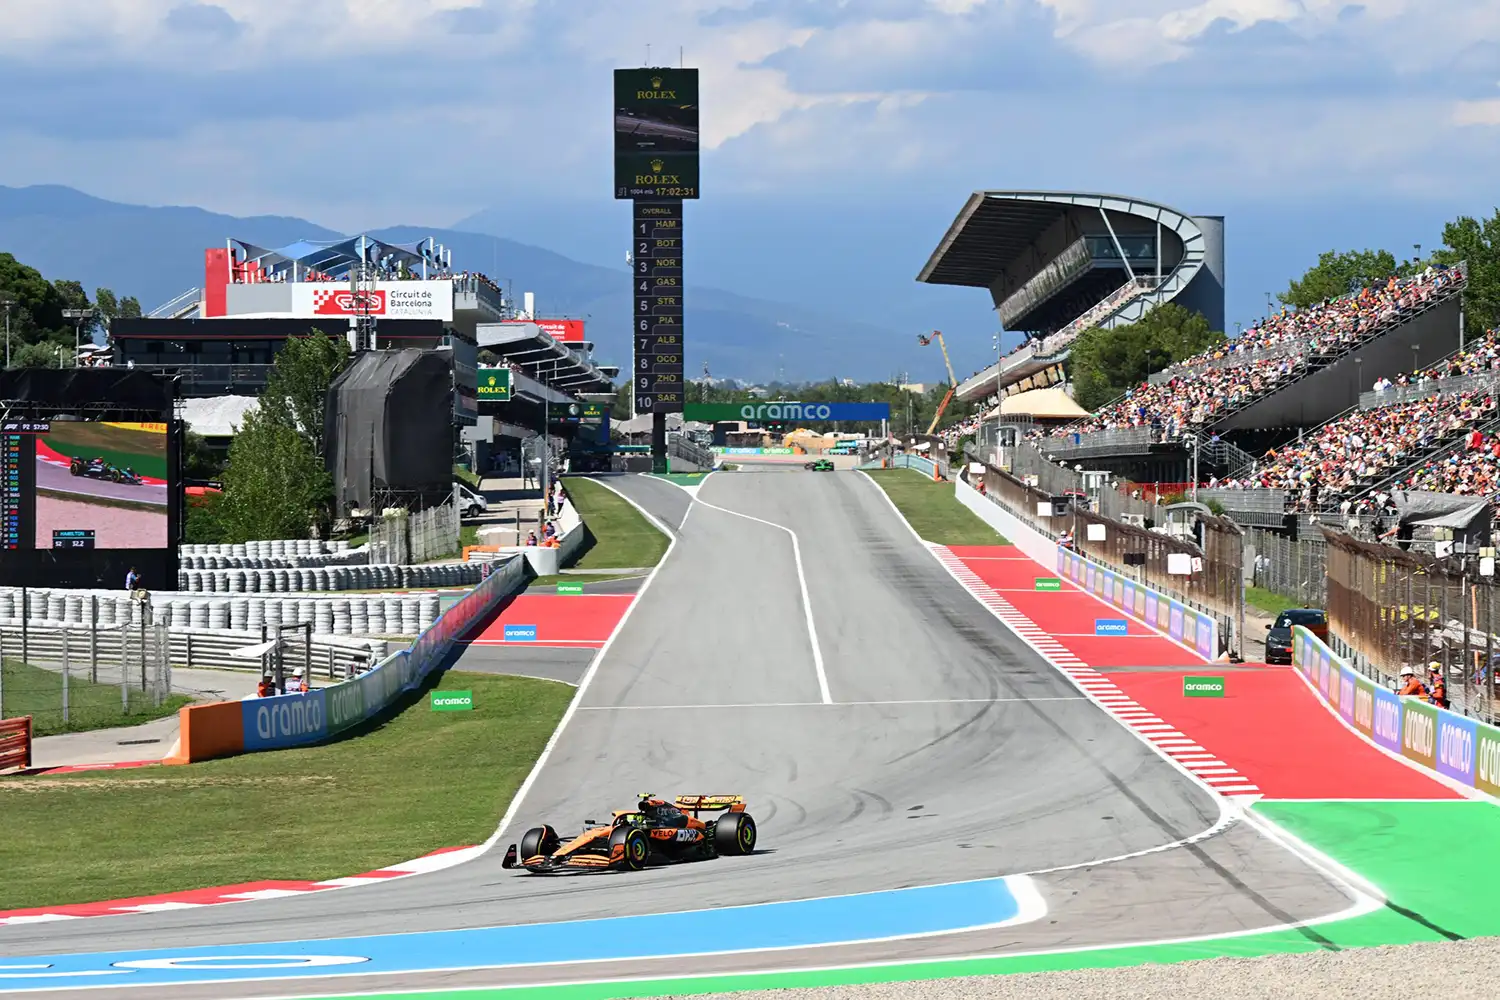 F1 – Norris Stuns Verstappen In Spain, Steals Pole Position By 0.02s